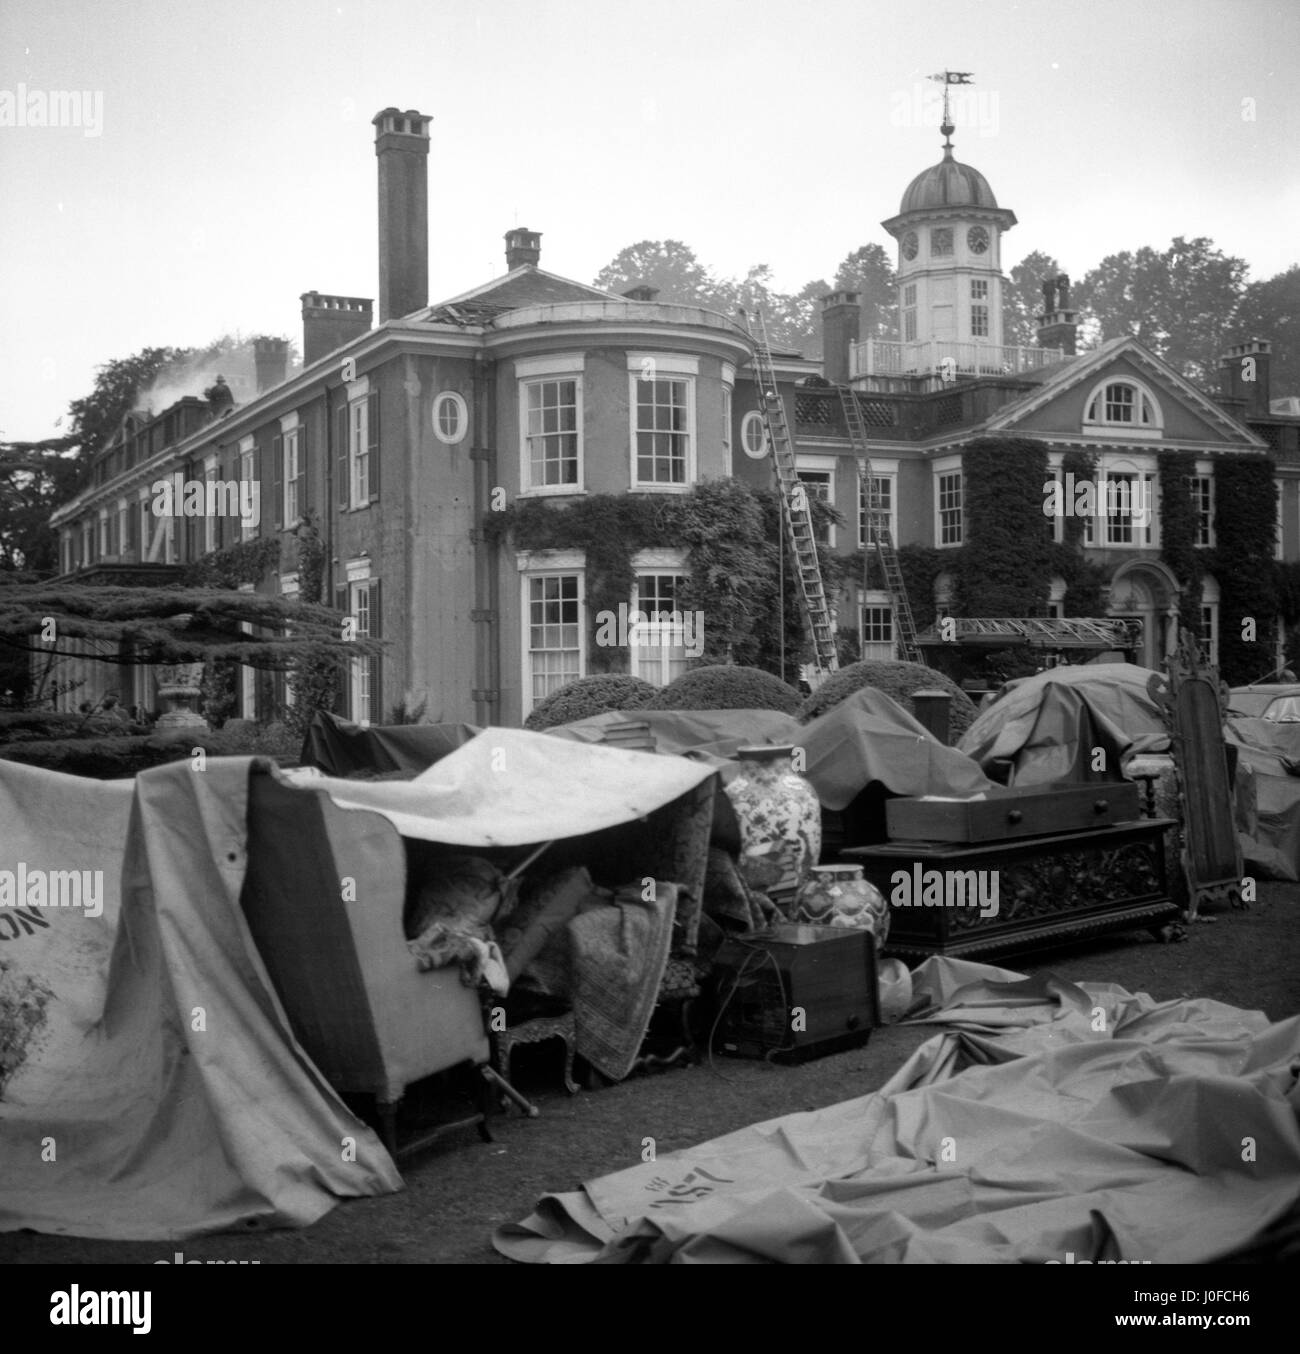 Valuables and furnishings from inside the building gathered outside on the lawn in front of Polesden Lacey, near Dorking, Surrey, after a fire broke out in the roof. Stock Photo